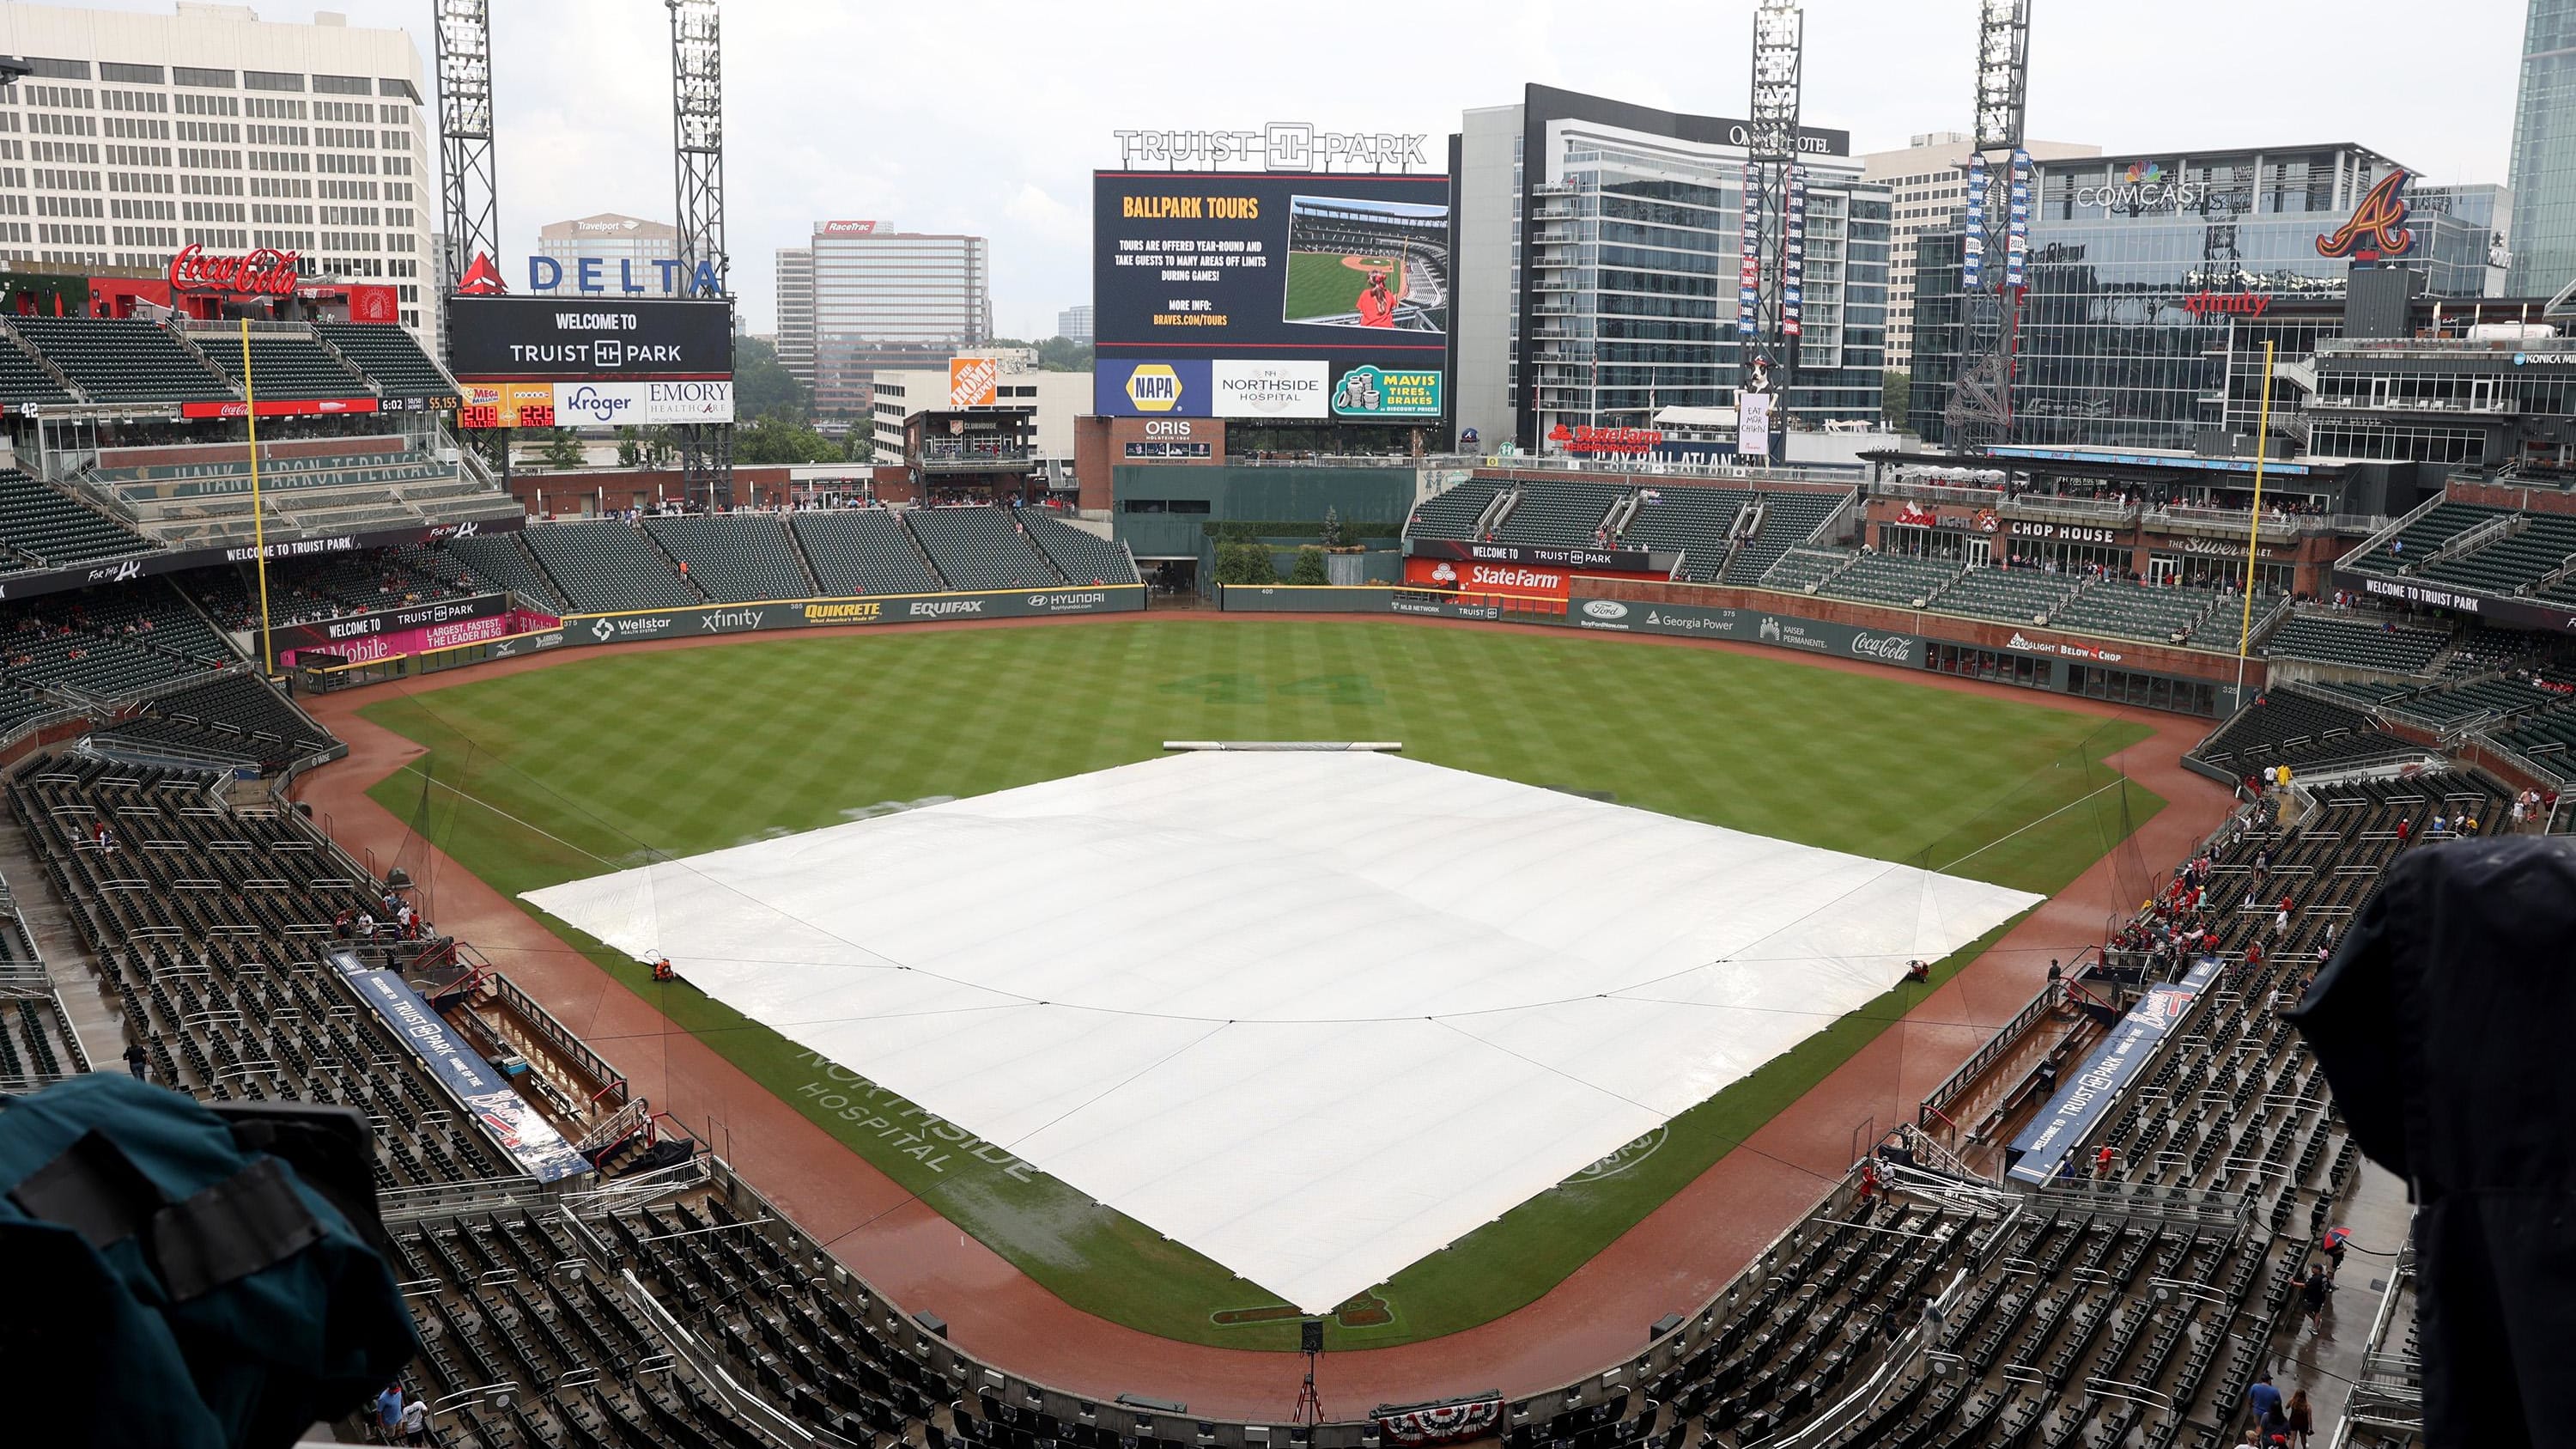 Today's Series Finale Against New York Mets to be Delayed